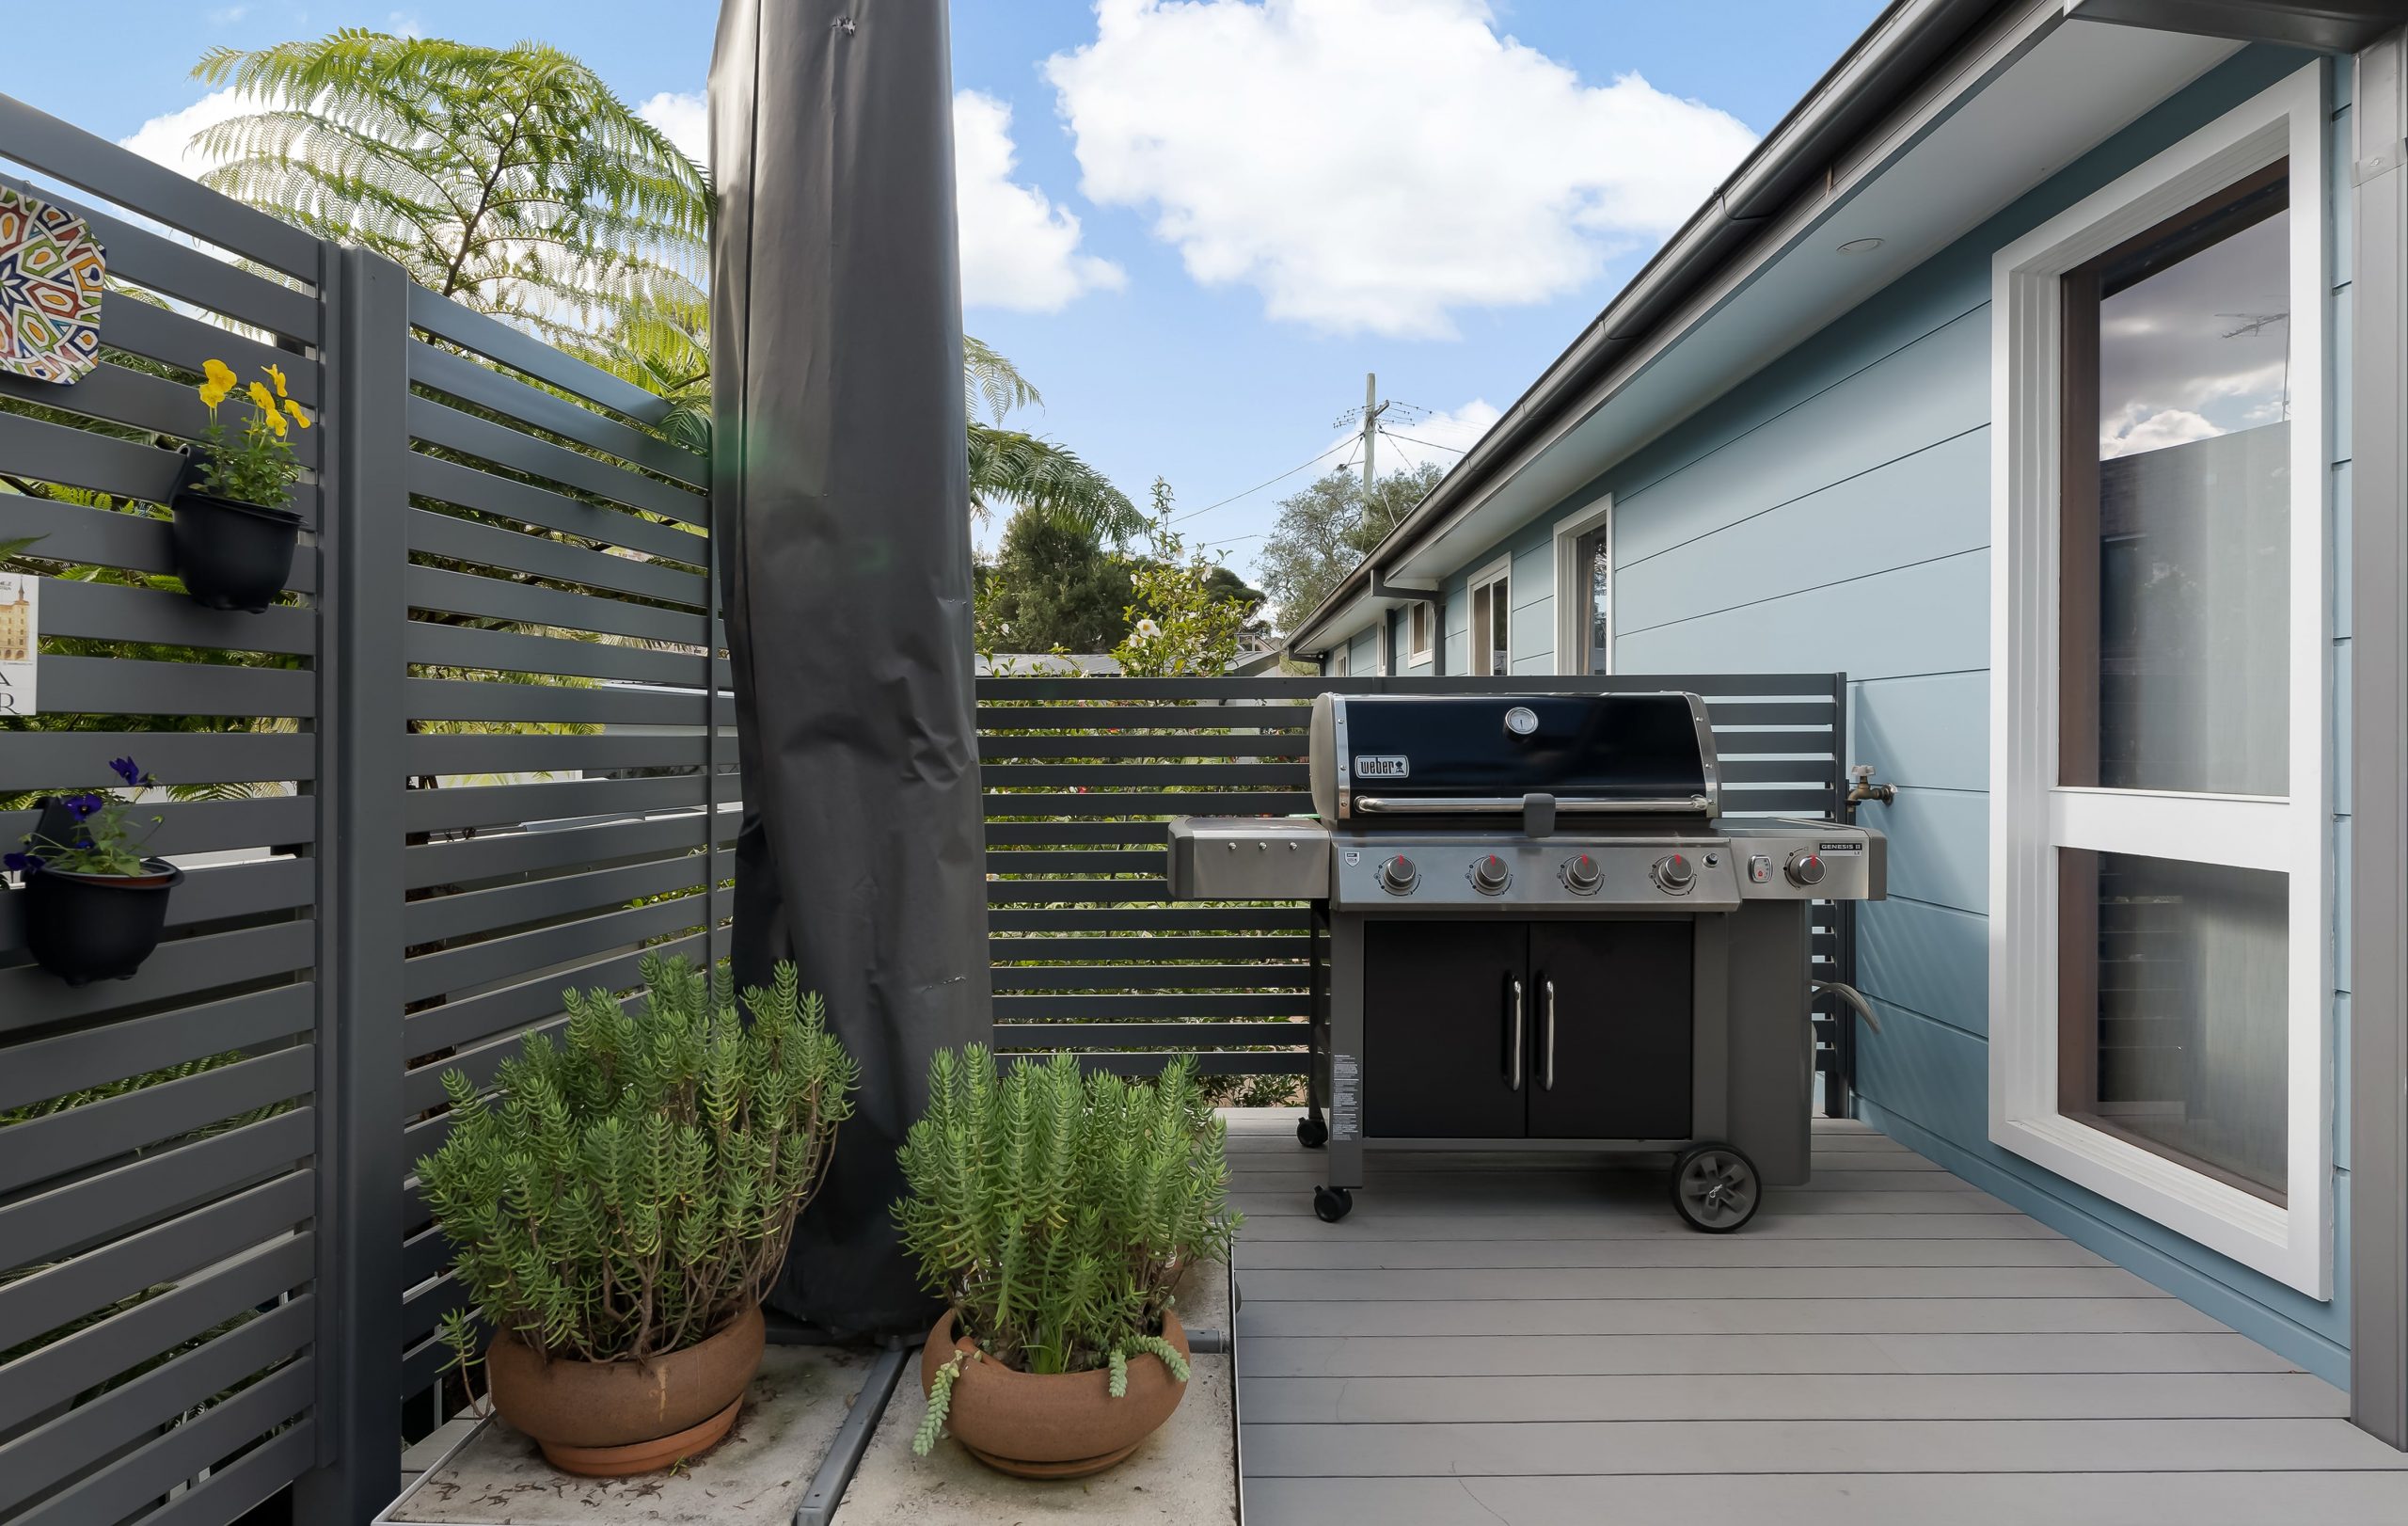 Mountain Ash composite decking boards with a grill and plants on top